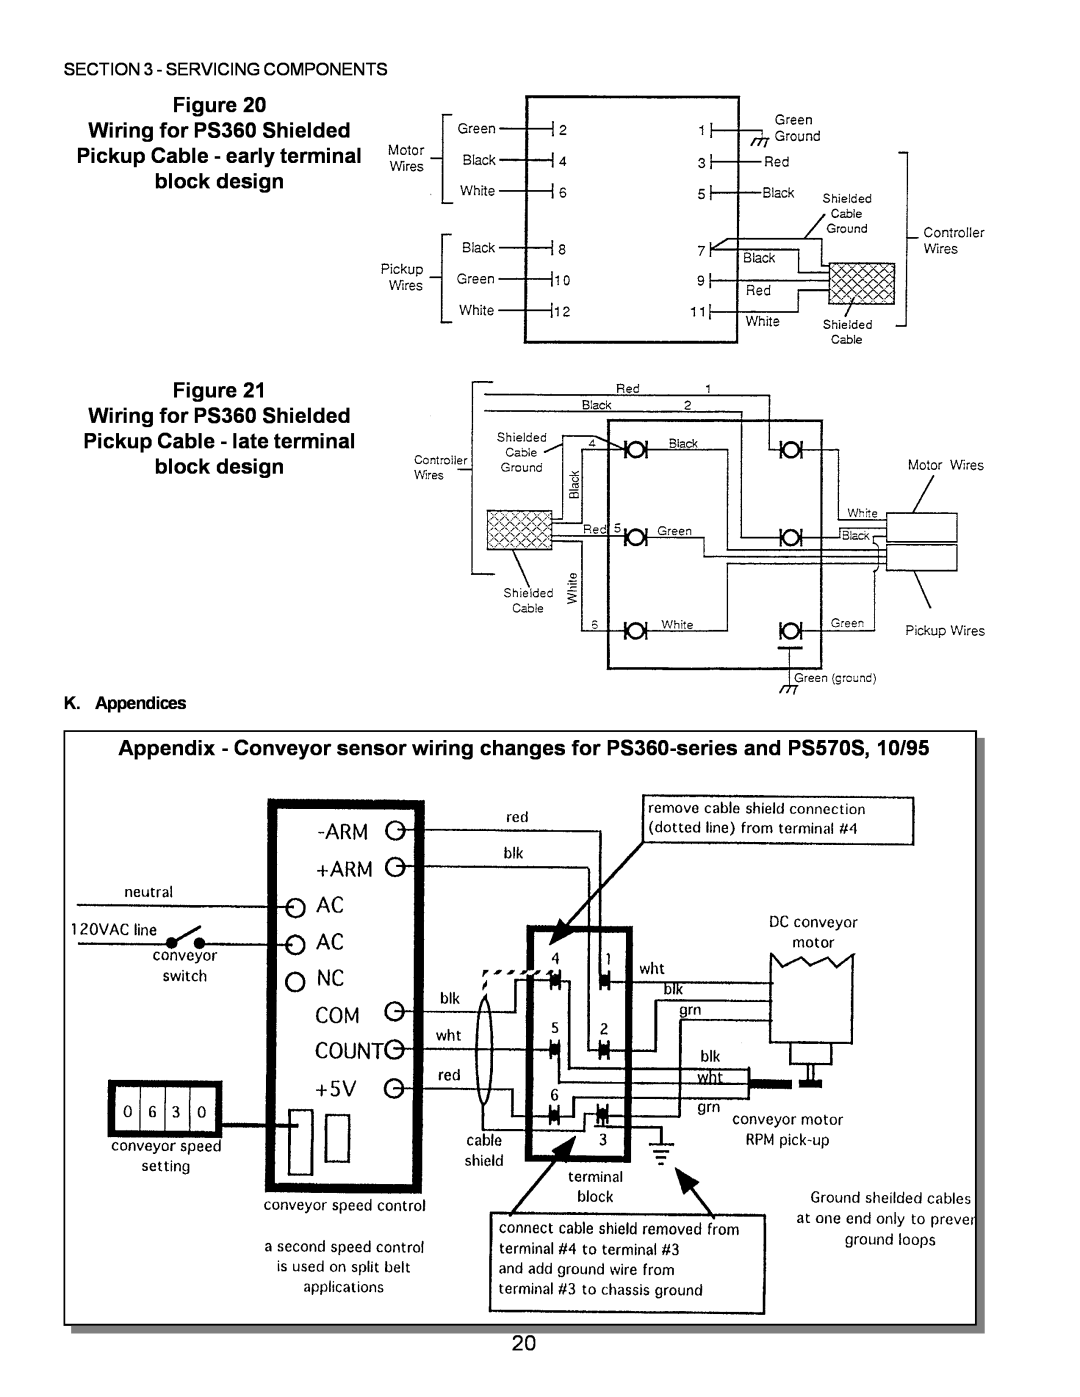 Middleby Marshall PS555, PS570, PS200 Wiring for PS360 Shielded Pickup Cable - early terminal block design, K. Appendices 